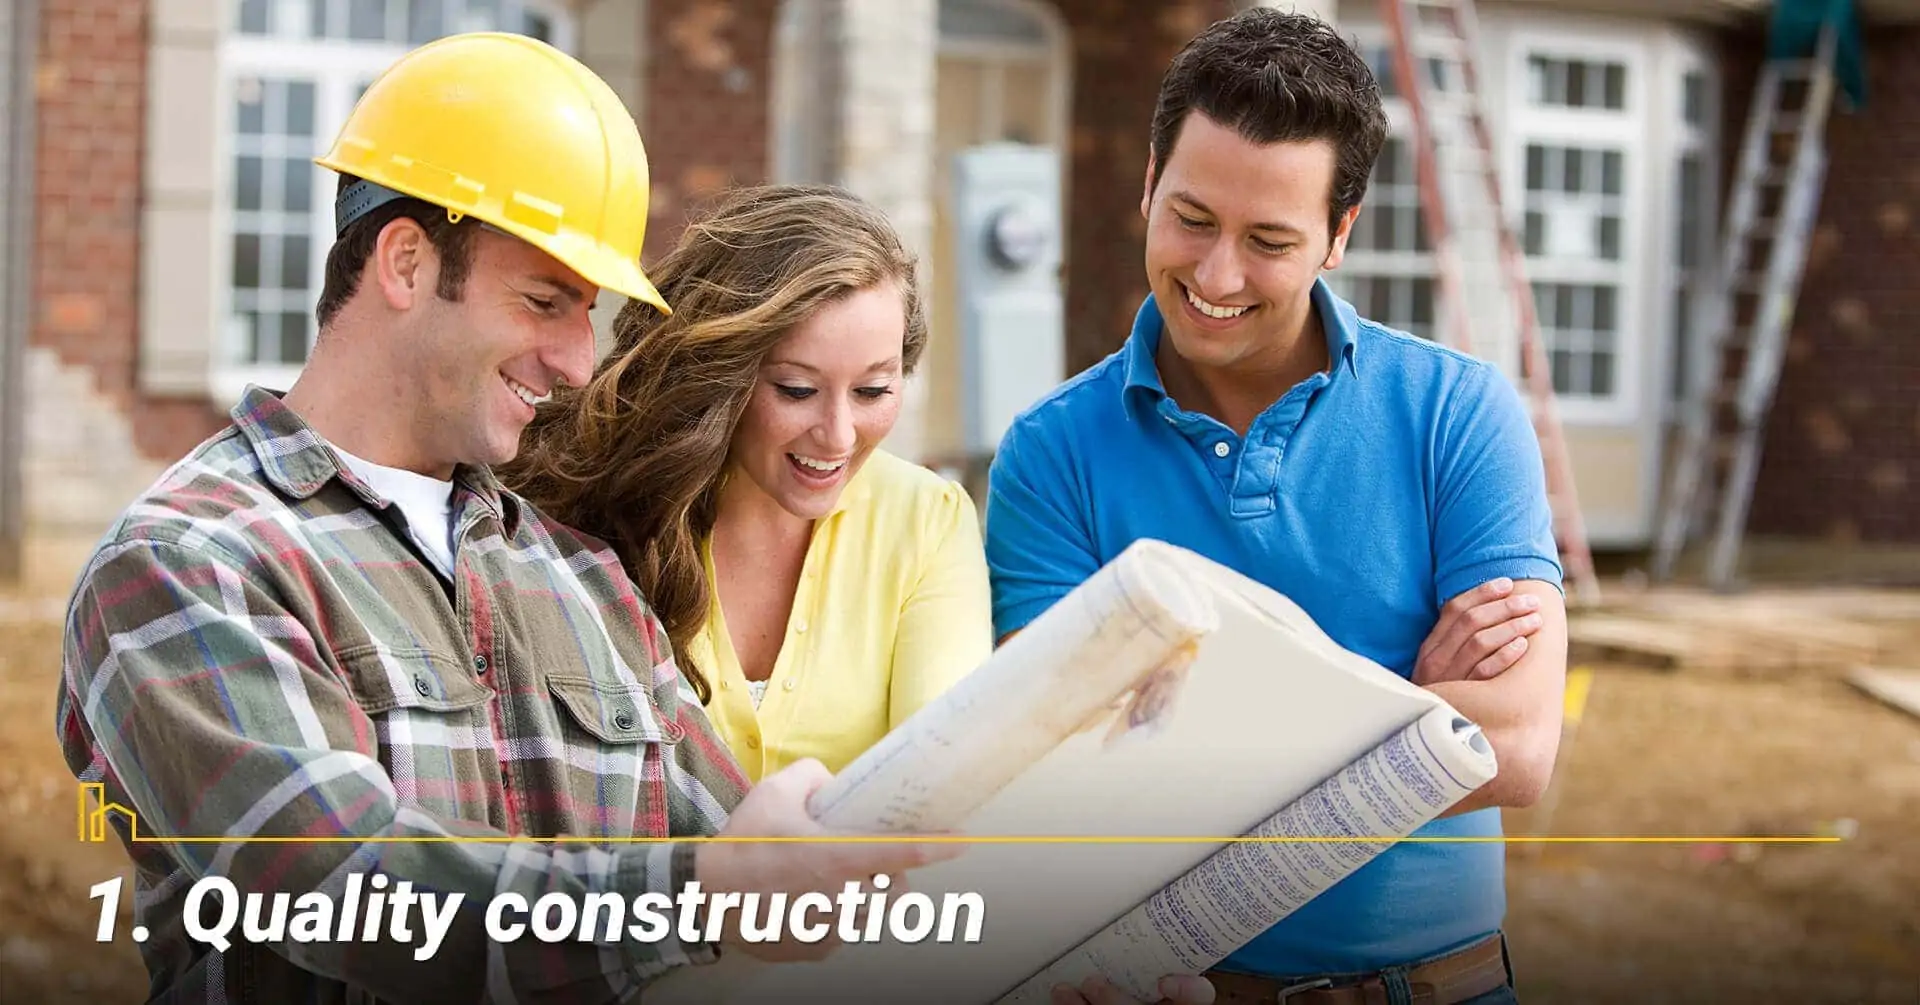 Quality construction, buying new construction home